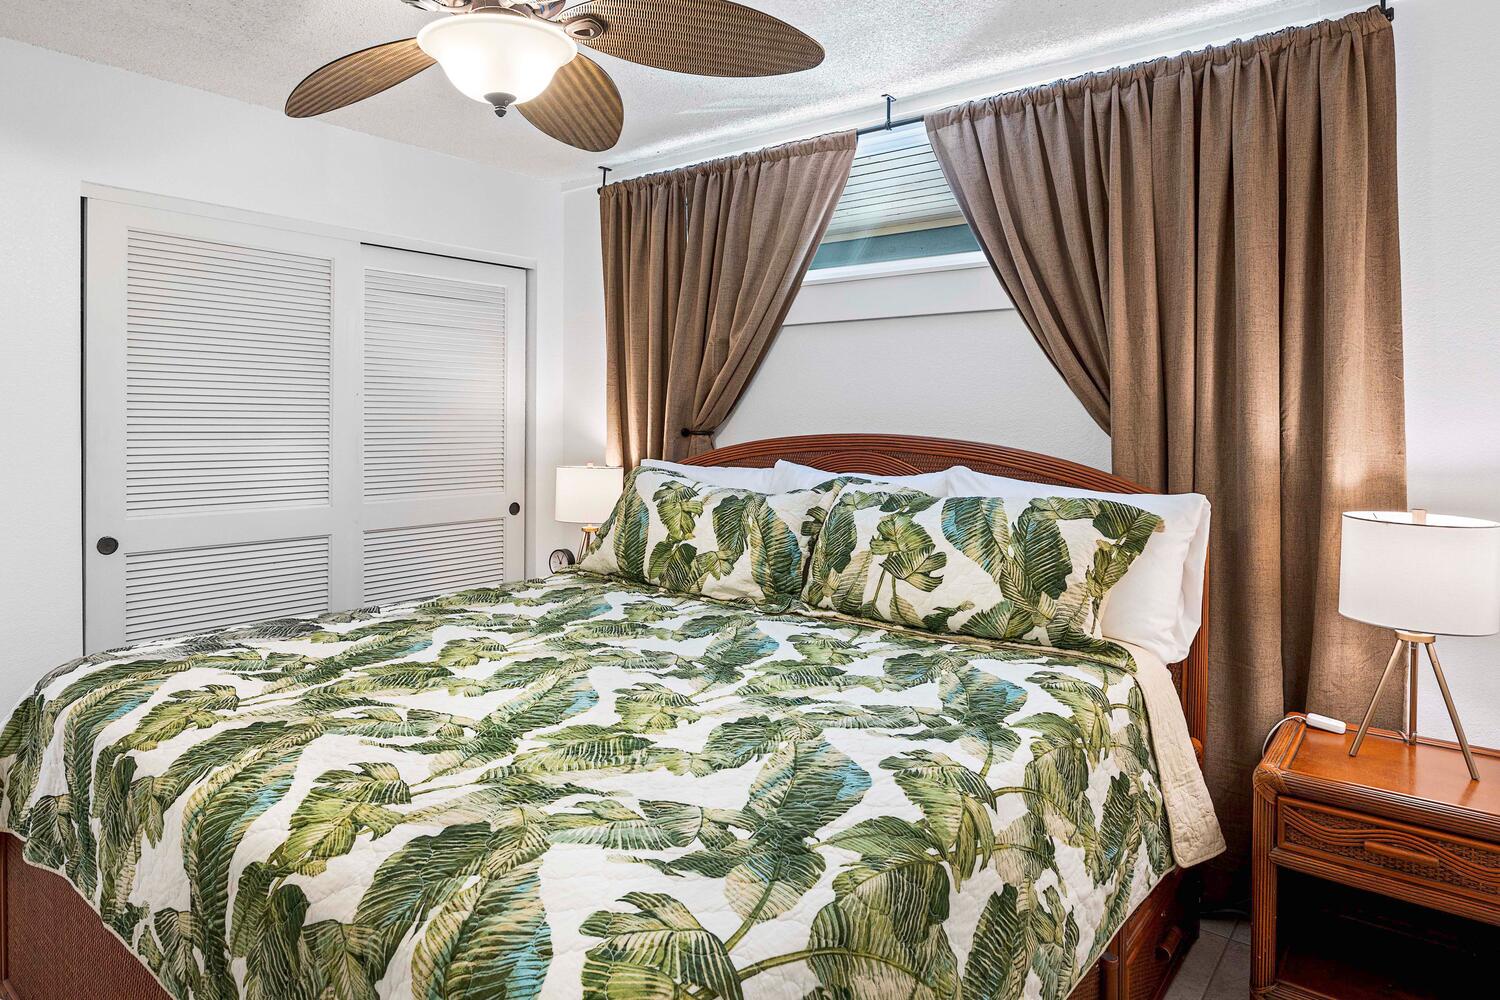 Kailua Kona Vacation Rentals, Kona Reef F23 - Cozy primary bedroom features a plush king bed.